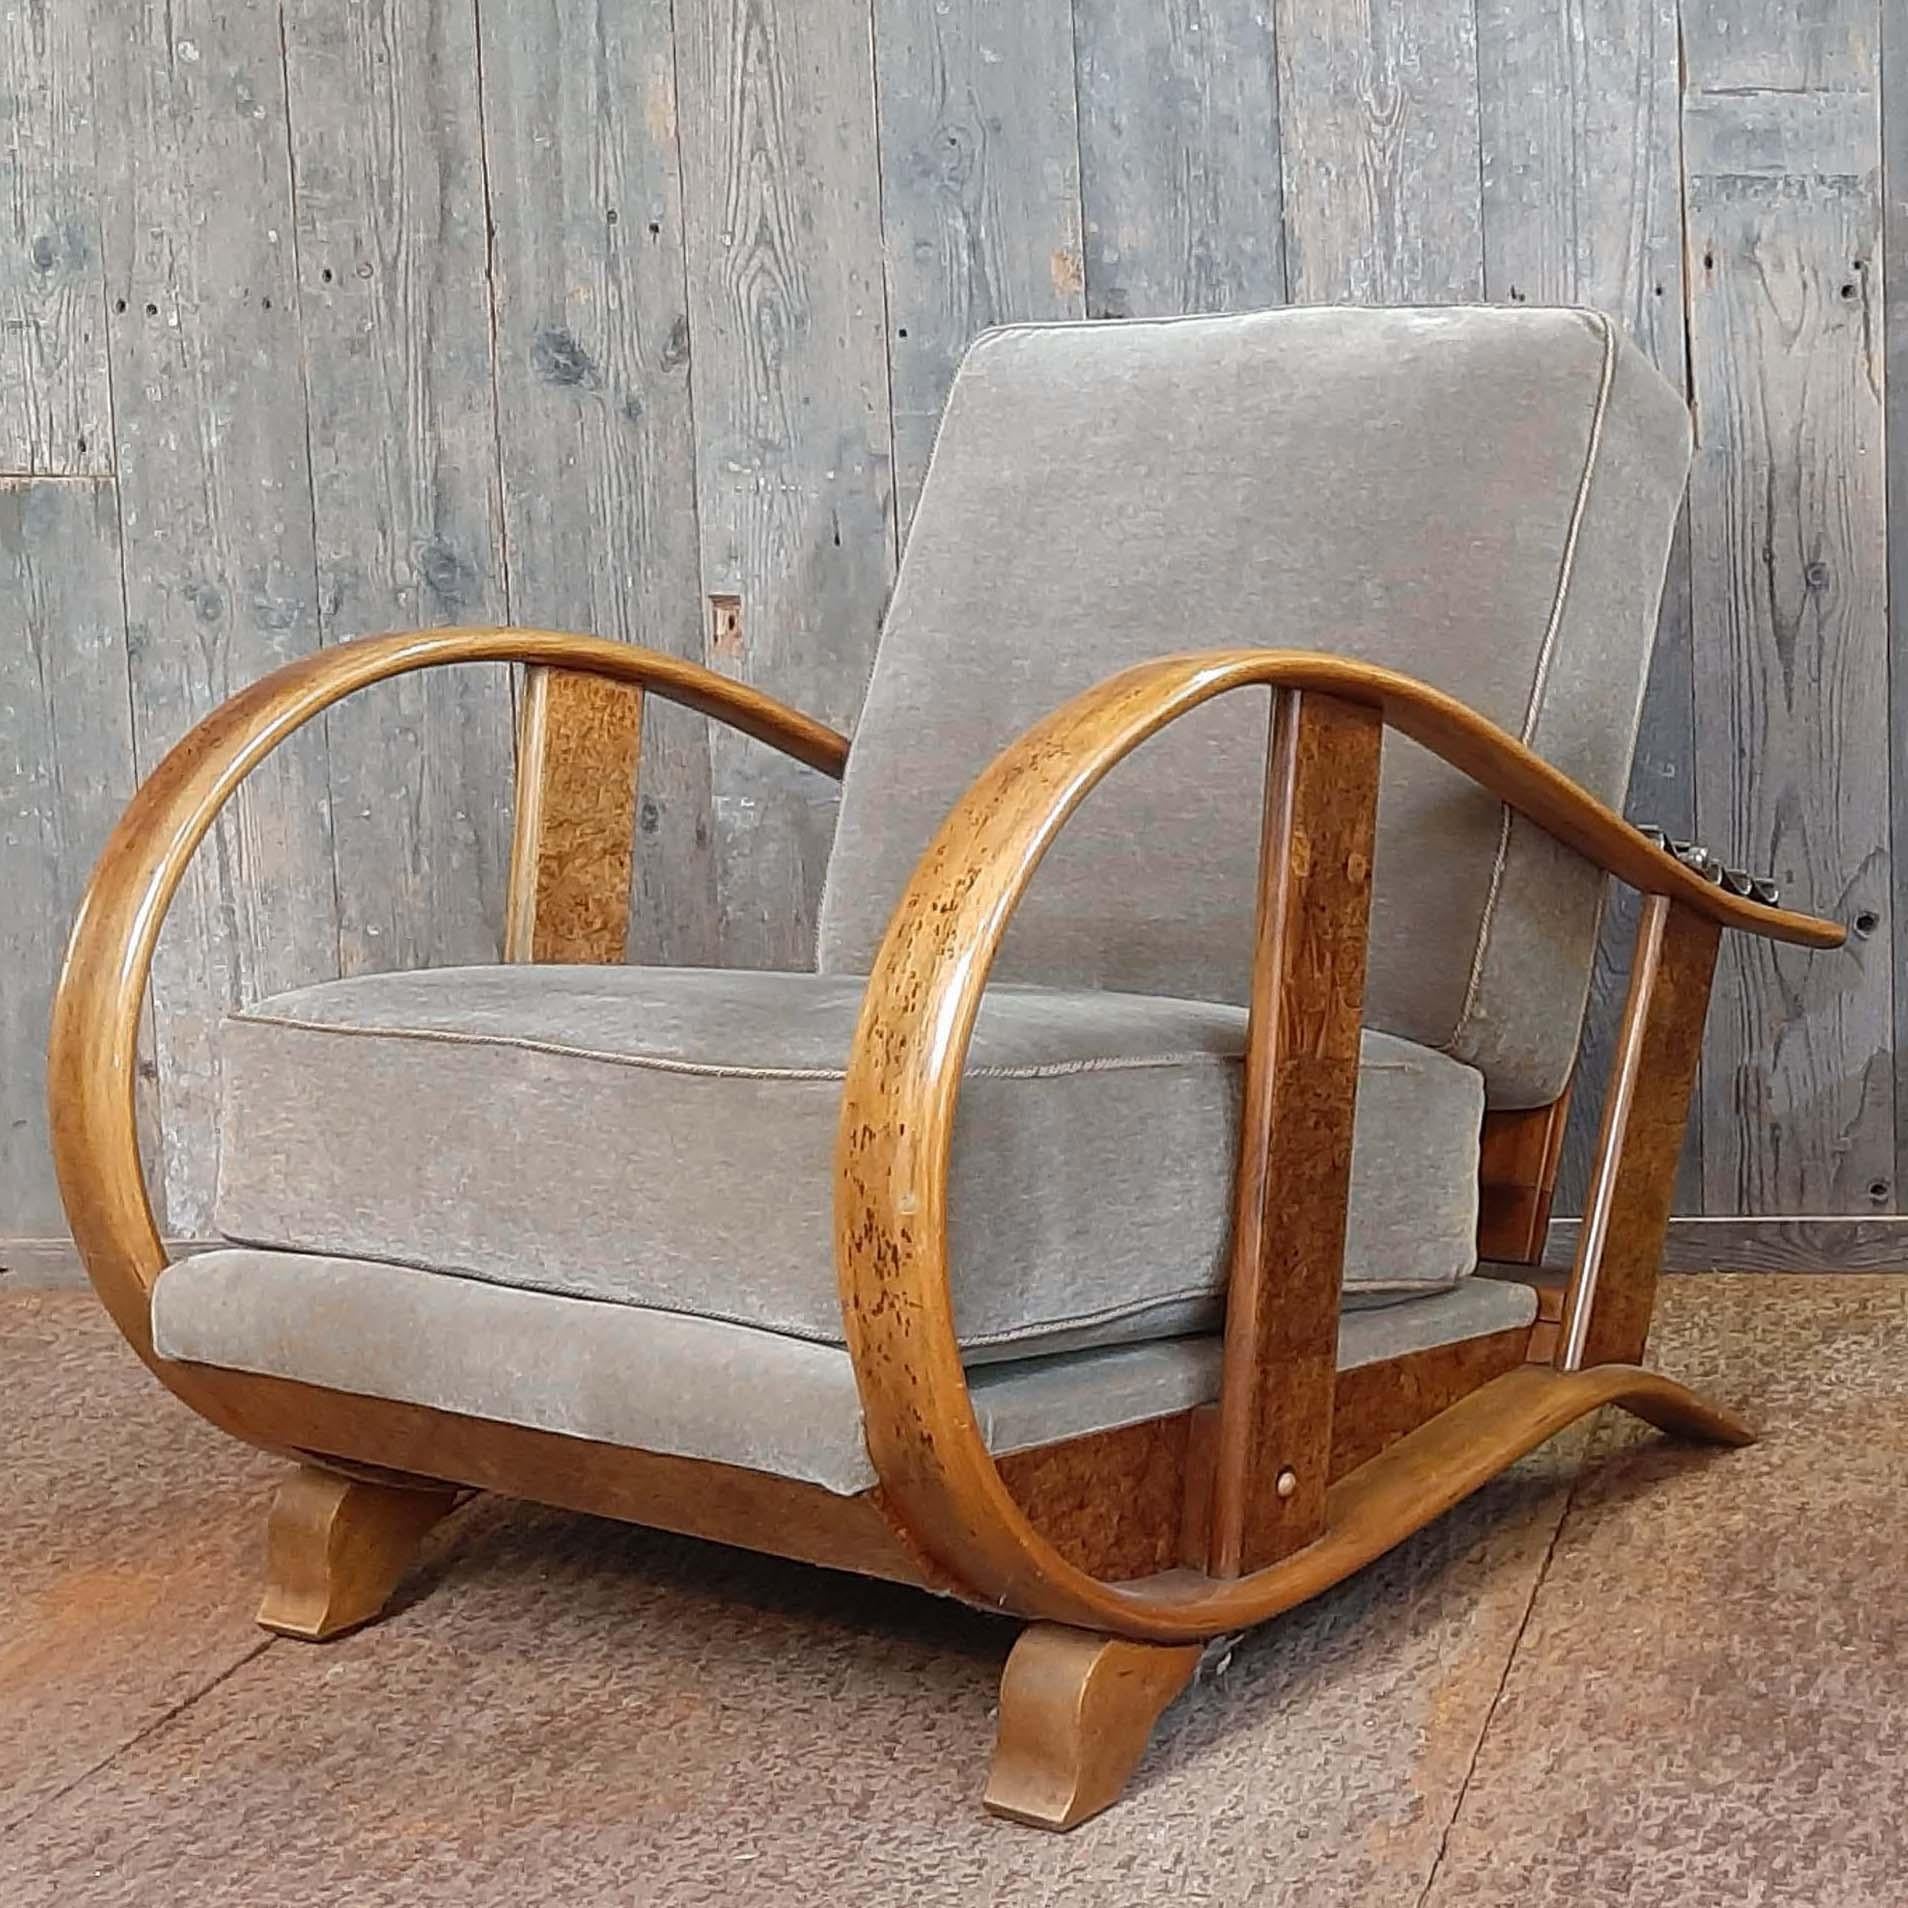 Pair of early 20th century Art Deco lounge chairs, in beech and fabric, by Jindrich Halabala, Czech Republic, 1930s. 

This extraordinary pair of Halabala chairs have a very dynamic appearance. Beautifully curved armrests in beech nicely blend